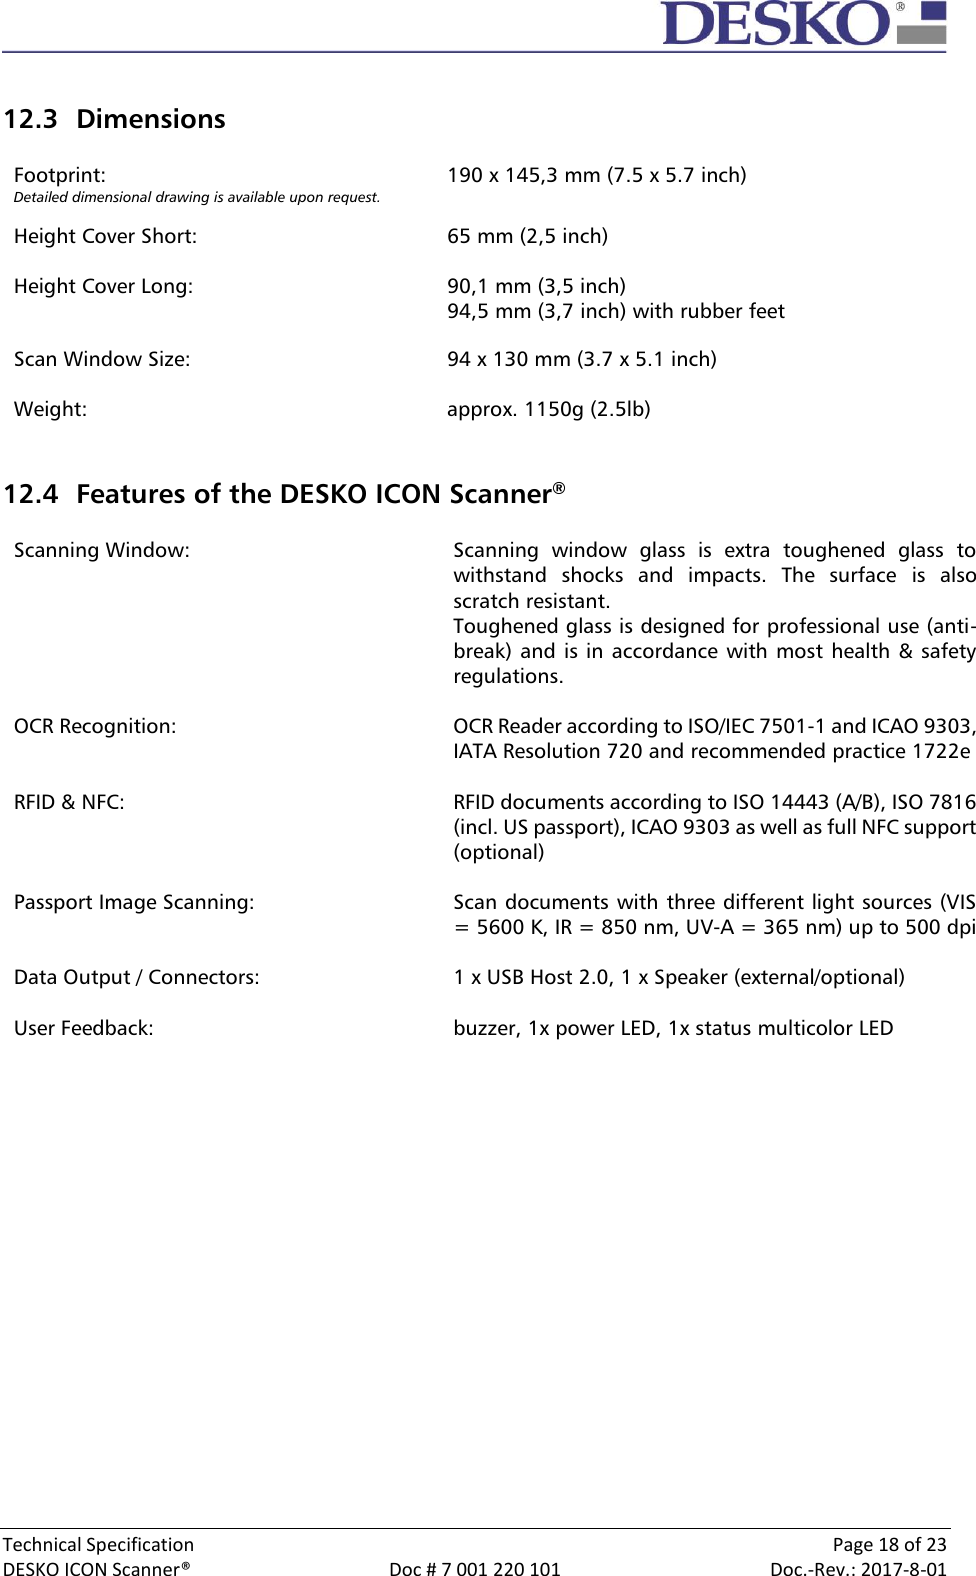  Technical Specification    Page 18 of 23 DESKO ICON Scanner®  Doc # 7 001 220 101  Doc.-Rev.: 2017-8-01   12.3 Dimensions  Footprint: Detailed dimensional drawing is available upon request.  Height Cover Short:  Height Cover Long:   190 x 145,3 mm (7.5 x 5.7 inch)   65 mm (2,5 inch)  90,1 mm (3,5 inch) 94,5 mm (3,7 inch) with rubber feet  Scan Window Size:  94 x 130 mm (3.7 x 5.1 inch)  Weight: approx. 1150g (2.5lb)   12.4 Features of the DESKO ICON Scanner®   Scanning Window: Scanning  window  glass  is  extra  toughened  glass  to withstand  shocks  and  impacts.  The  surface  is  also scratch resistant. Toughened glass is designed for professional use (anti-break) and is in  accordance with most  health &amp; safety regulations.  OCR Recognition: OCR Reader according to ISO/IEC 7501-1 and ICAO 9303, IATA Resolution 720 and recommended practice 1722e  RFID &amp; NFC: RFID documents according to ISO 14443 (A/B), ISO 7816 (incl. US passport), ICAO 9303 as well as full NFC support (optional)  Passport Image Scanning: Scan documents with three different light sources (VIS = 5600 K, IR = 850 nm, UV-A = 365 nm) up to 500 dpi  Data Output / Connectors: 1 x USB Host 2.0, 1 x Speaker (external/optional)  User Feedback: buzzer, 1x power LED, 1x status multicolor LED      